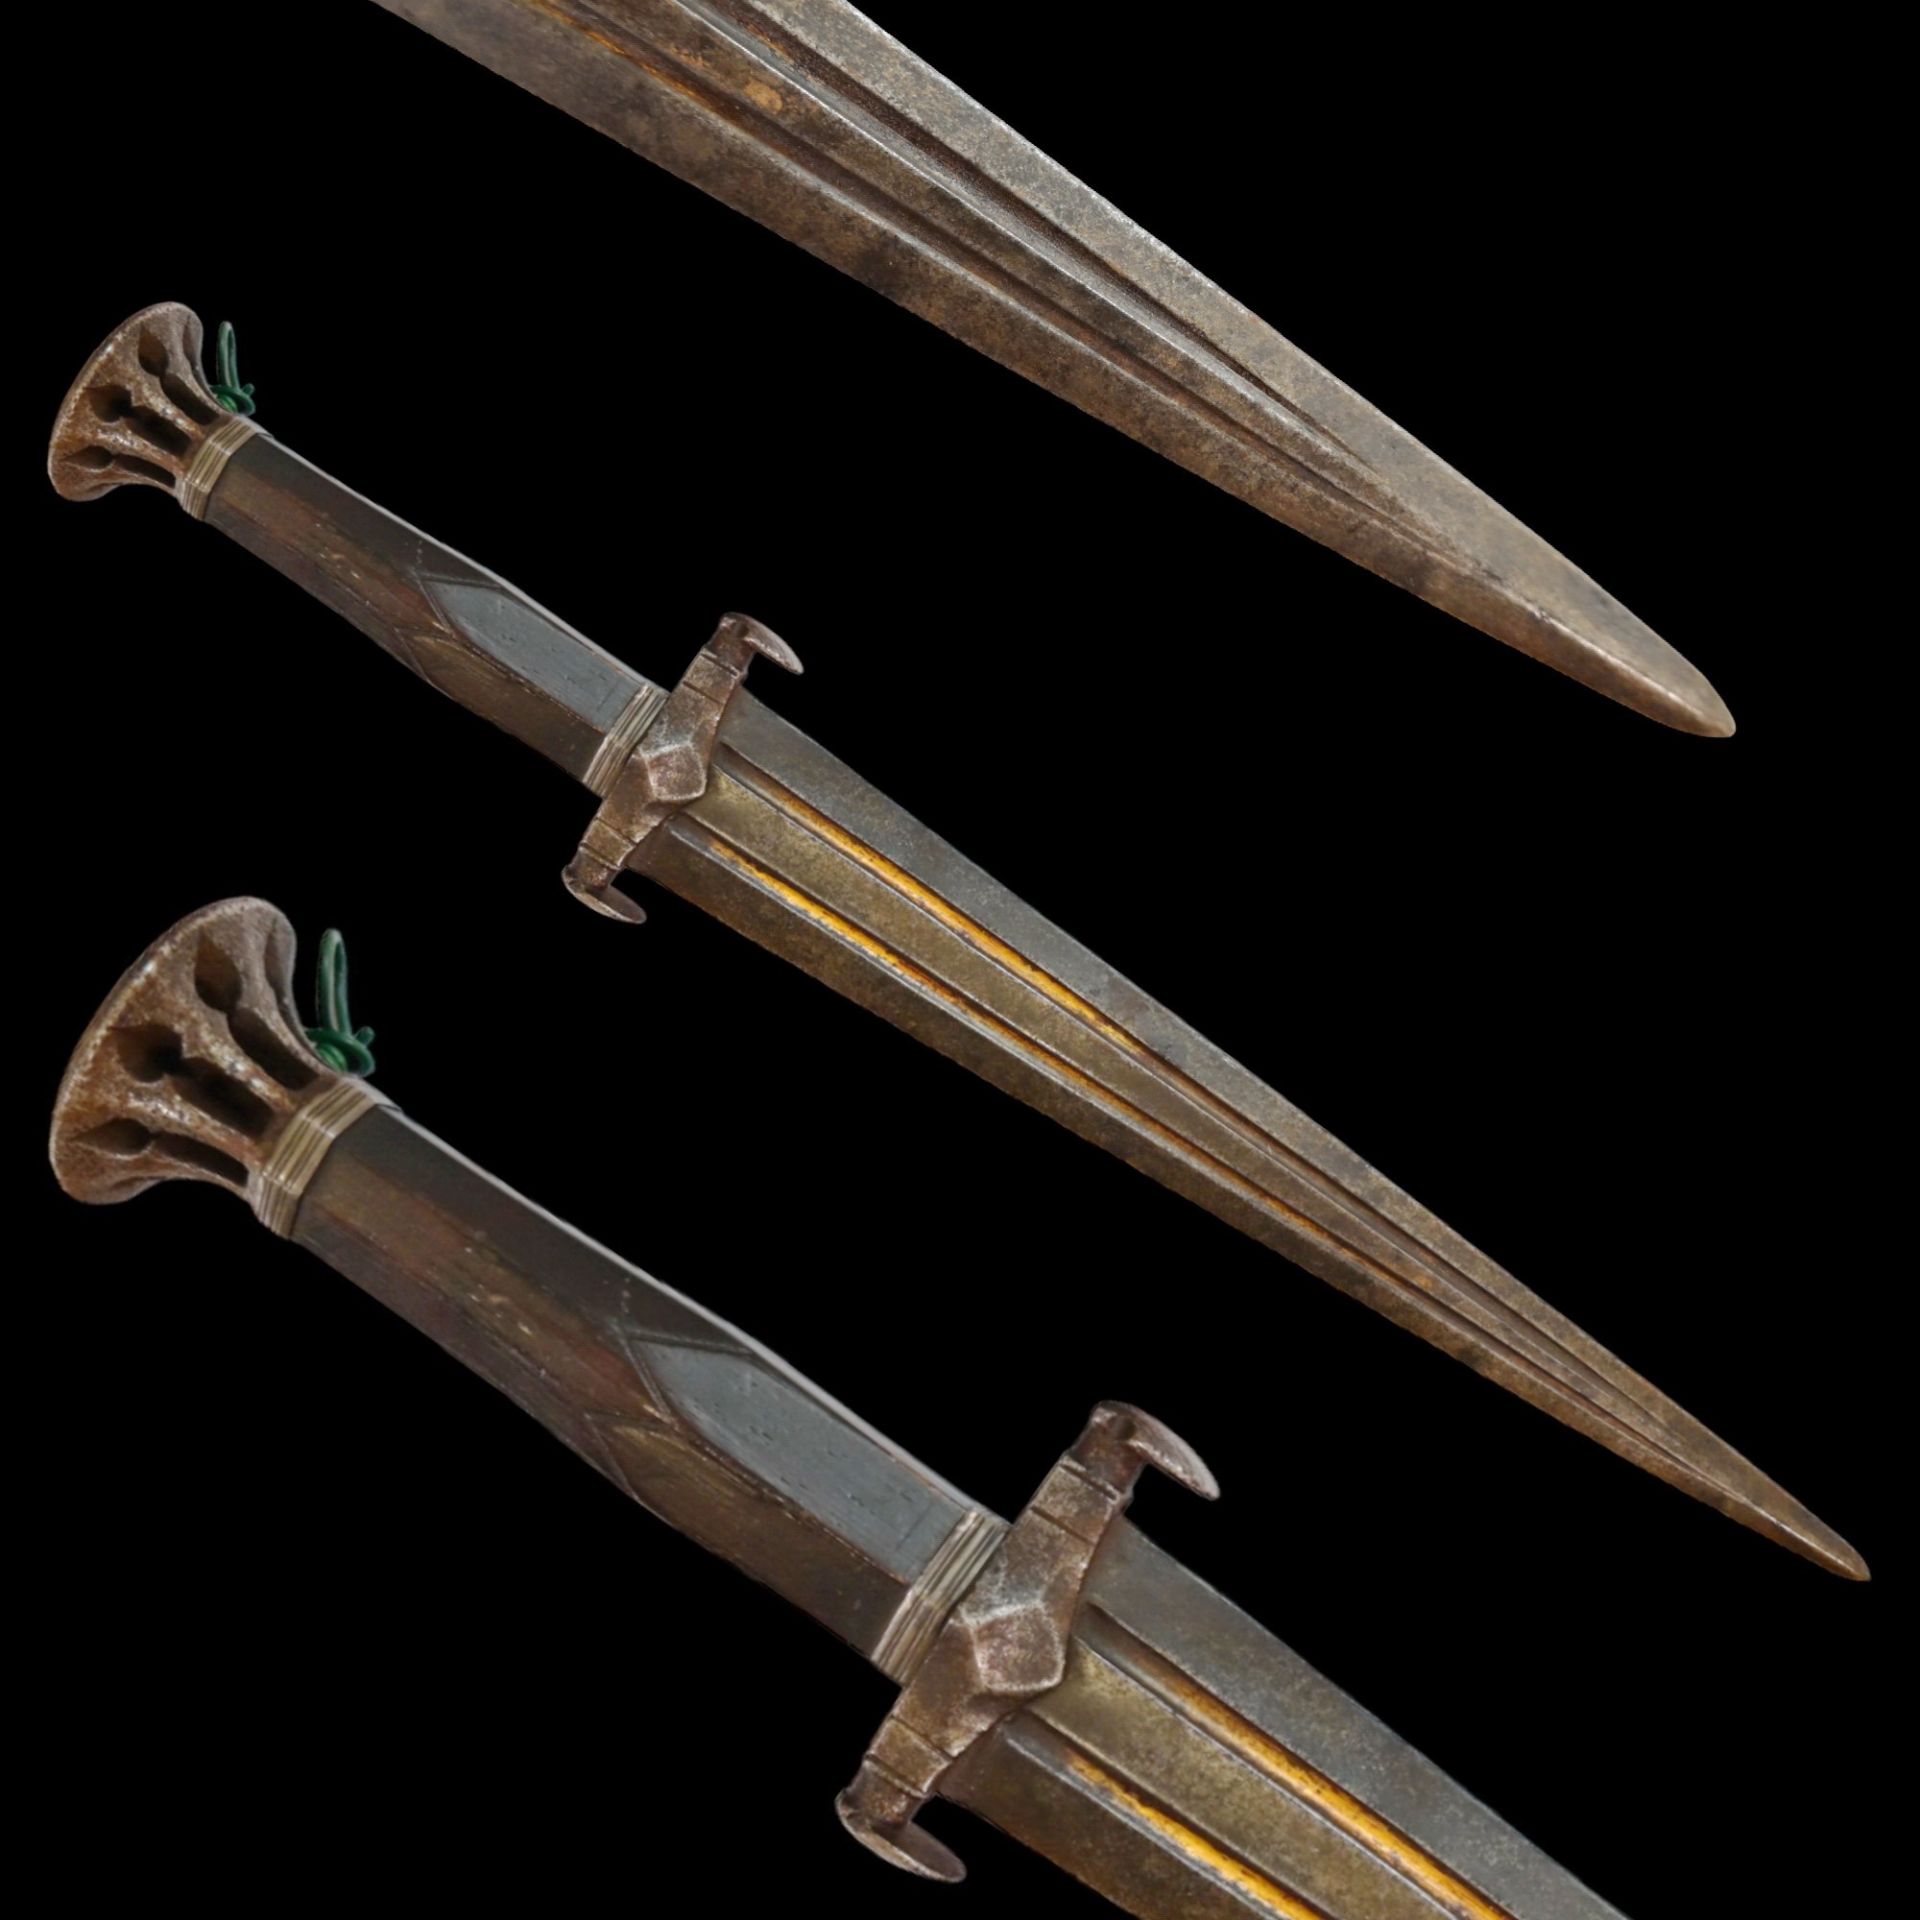 Very rare medieval dagger in excellent condition, France, 15th-16th century.